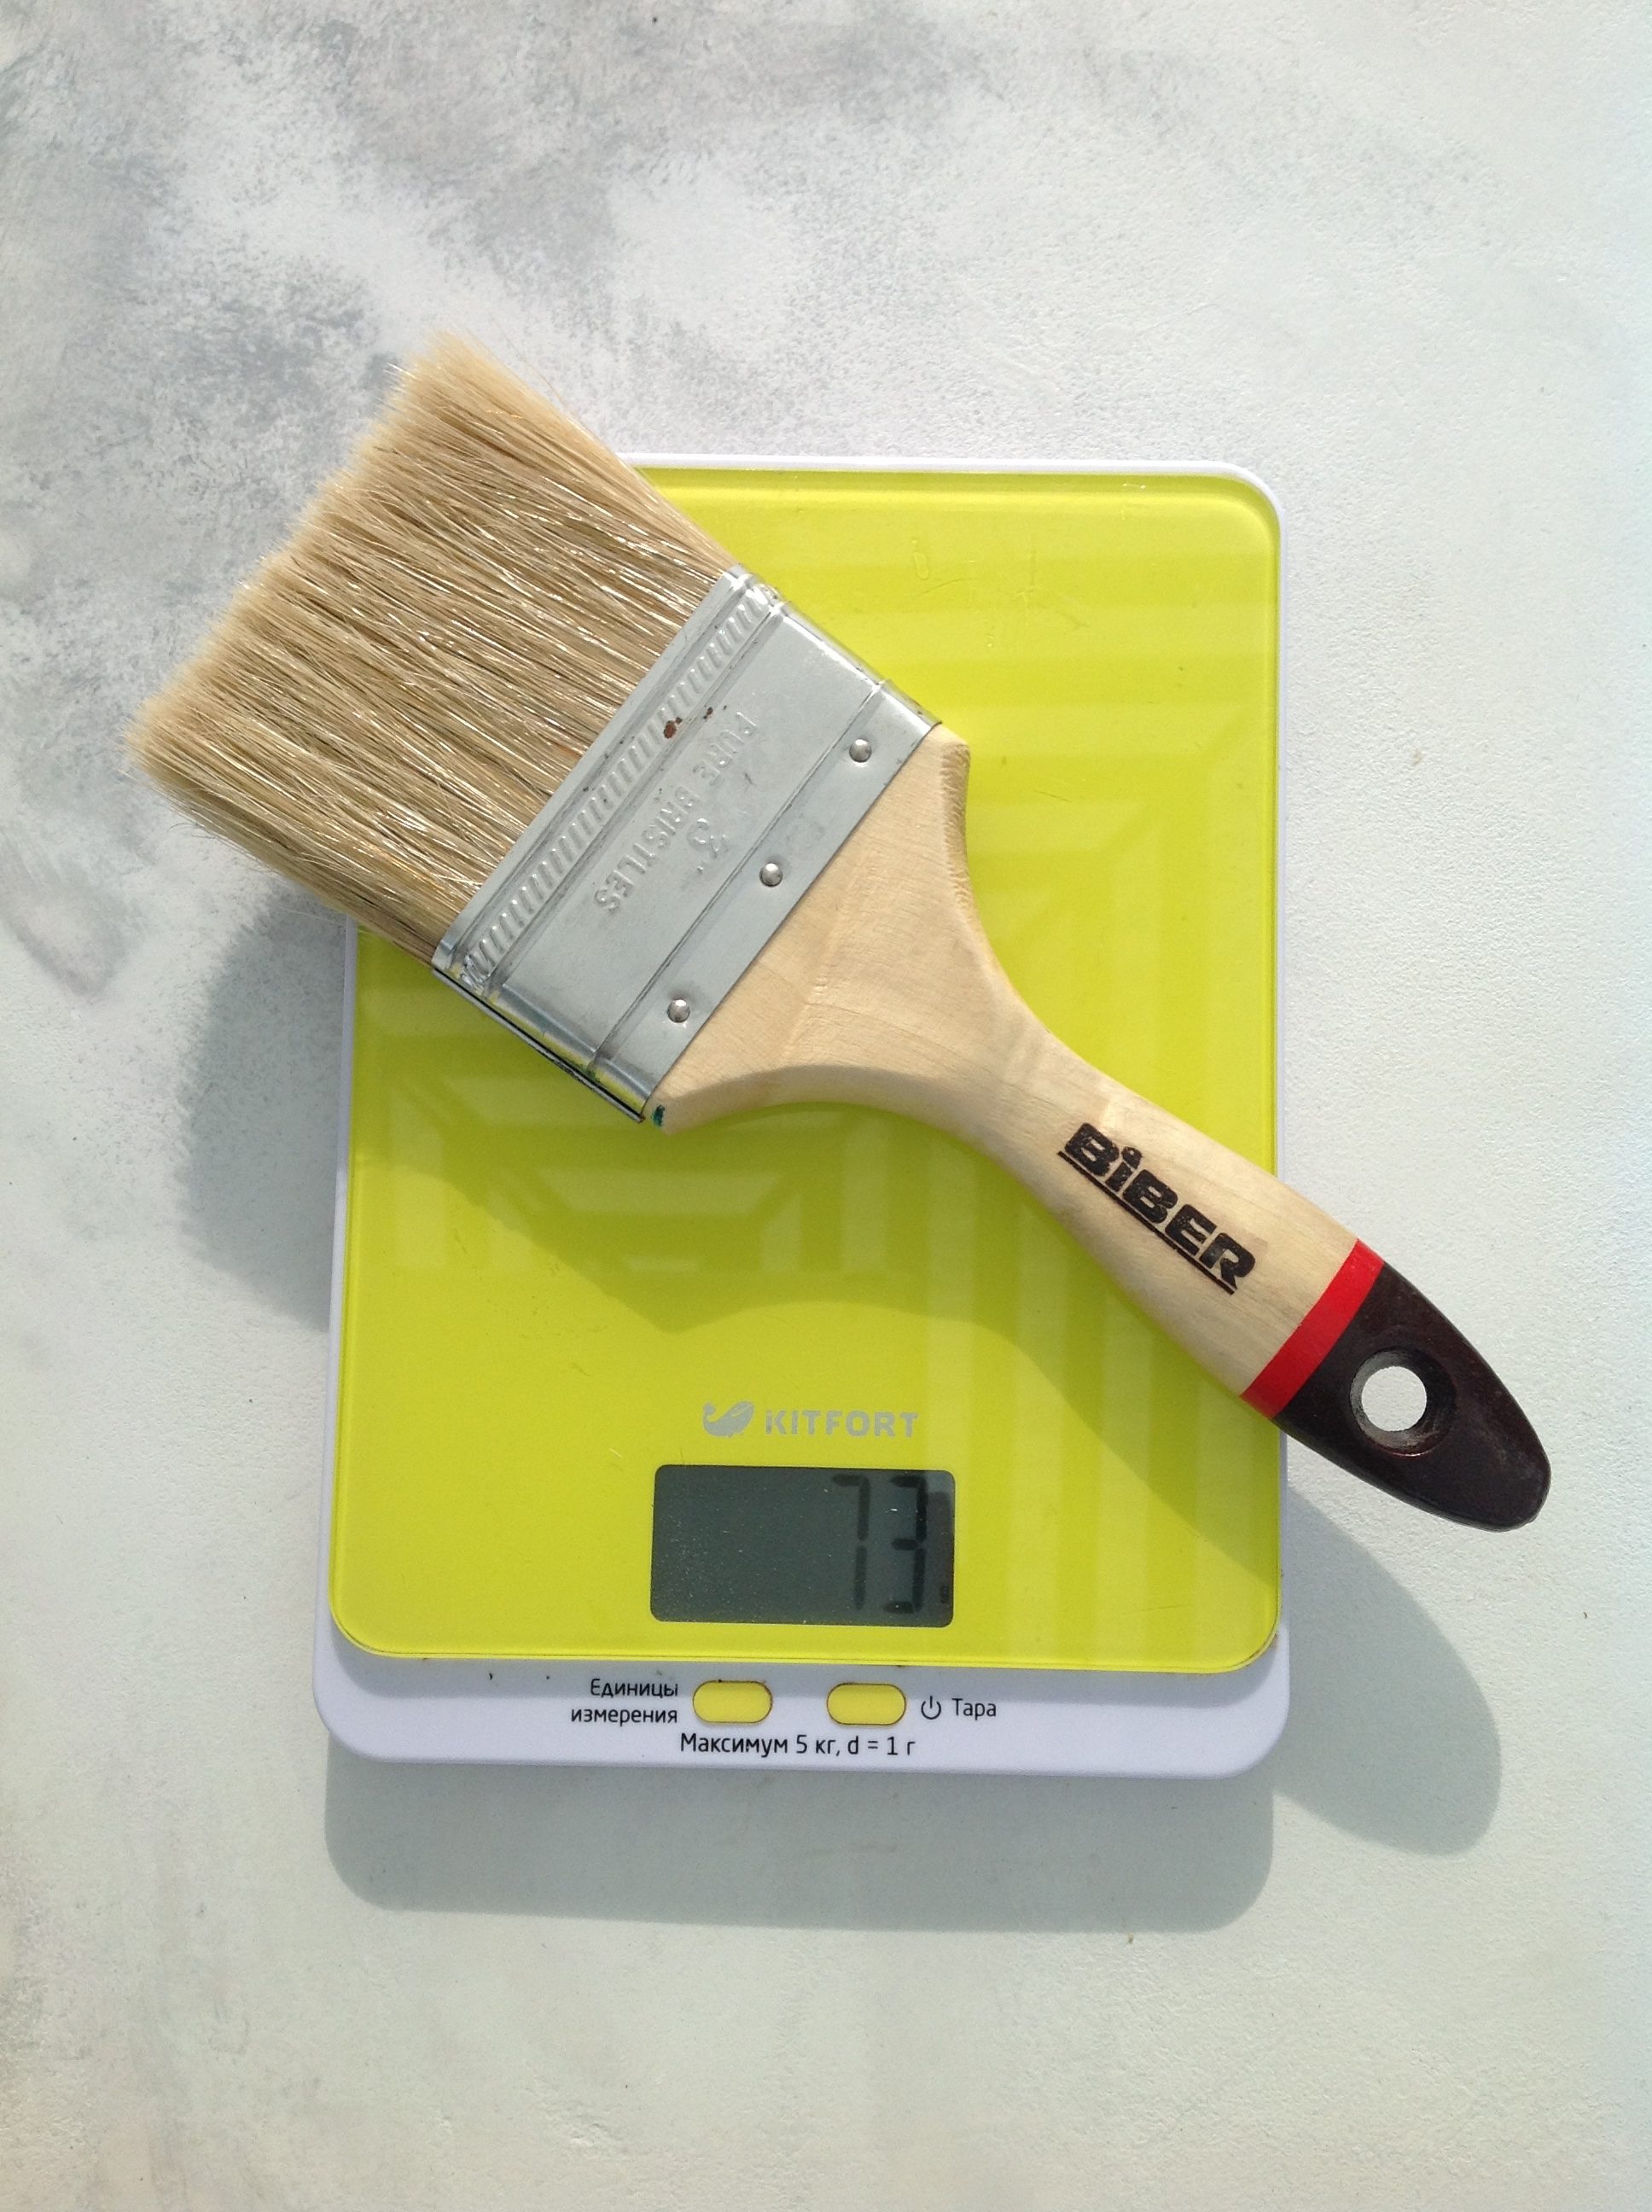 How much does a large paint brush weigh?